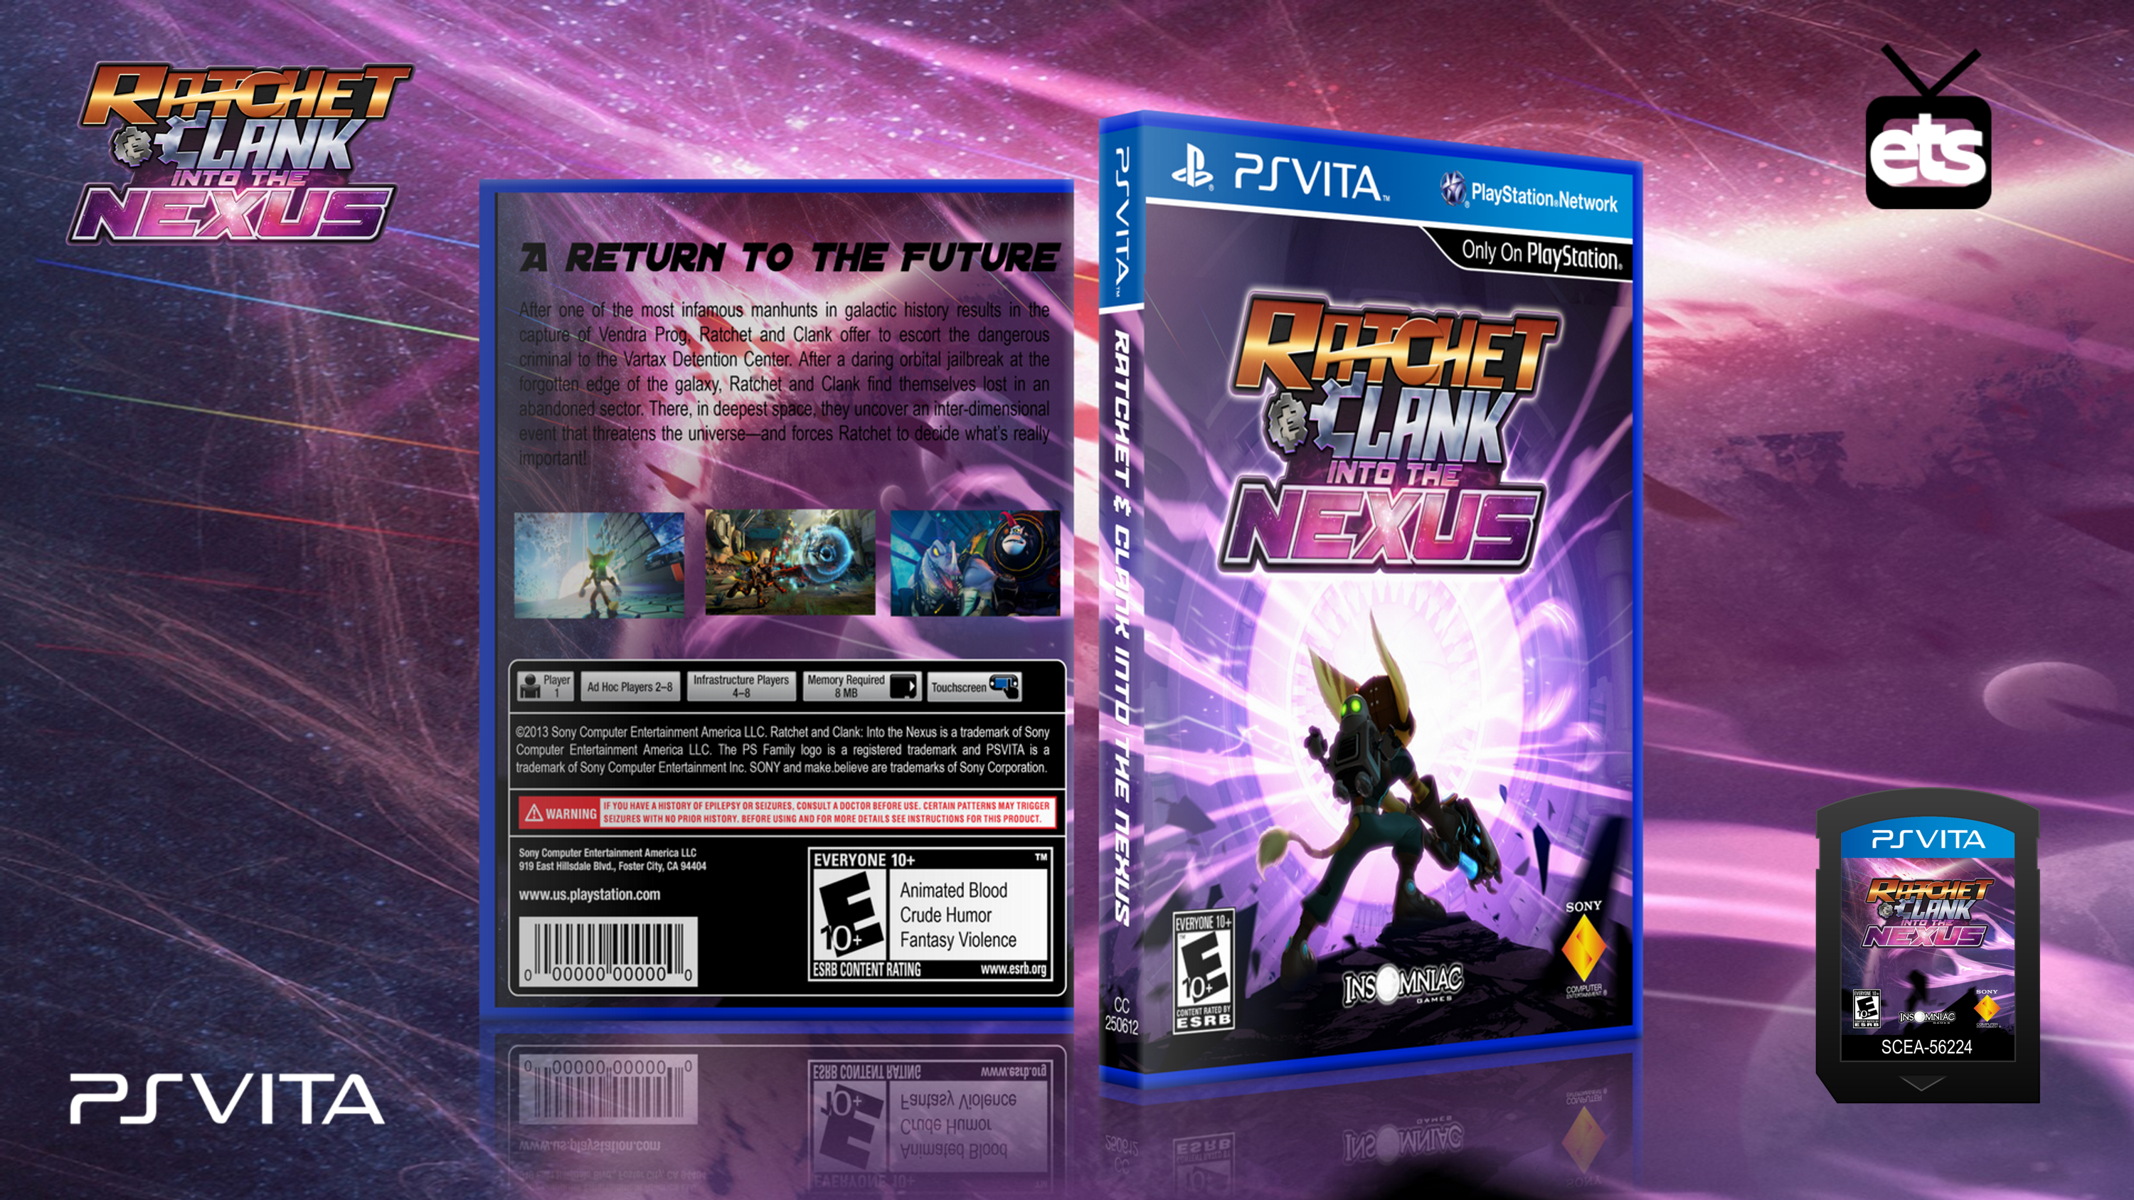 ratchet and clank into the nexus full game download free